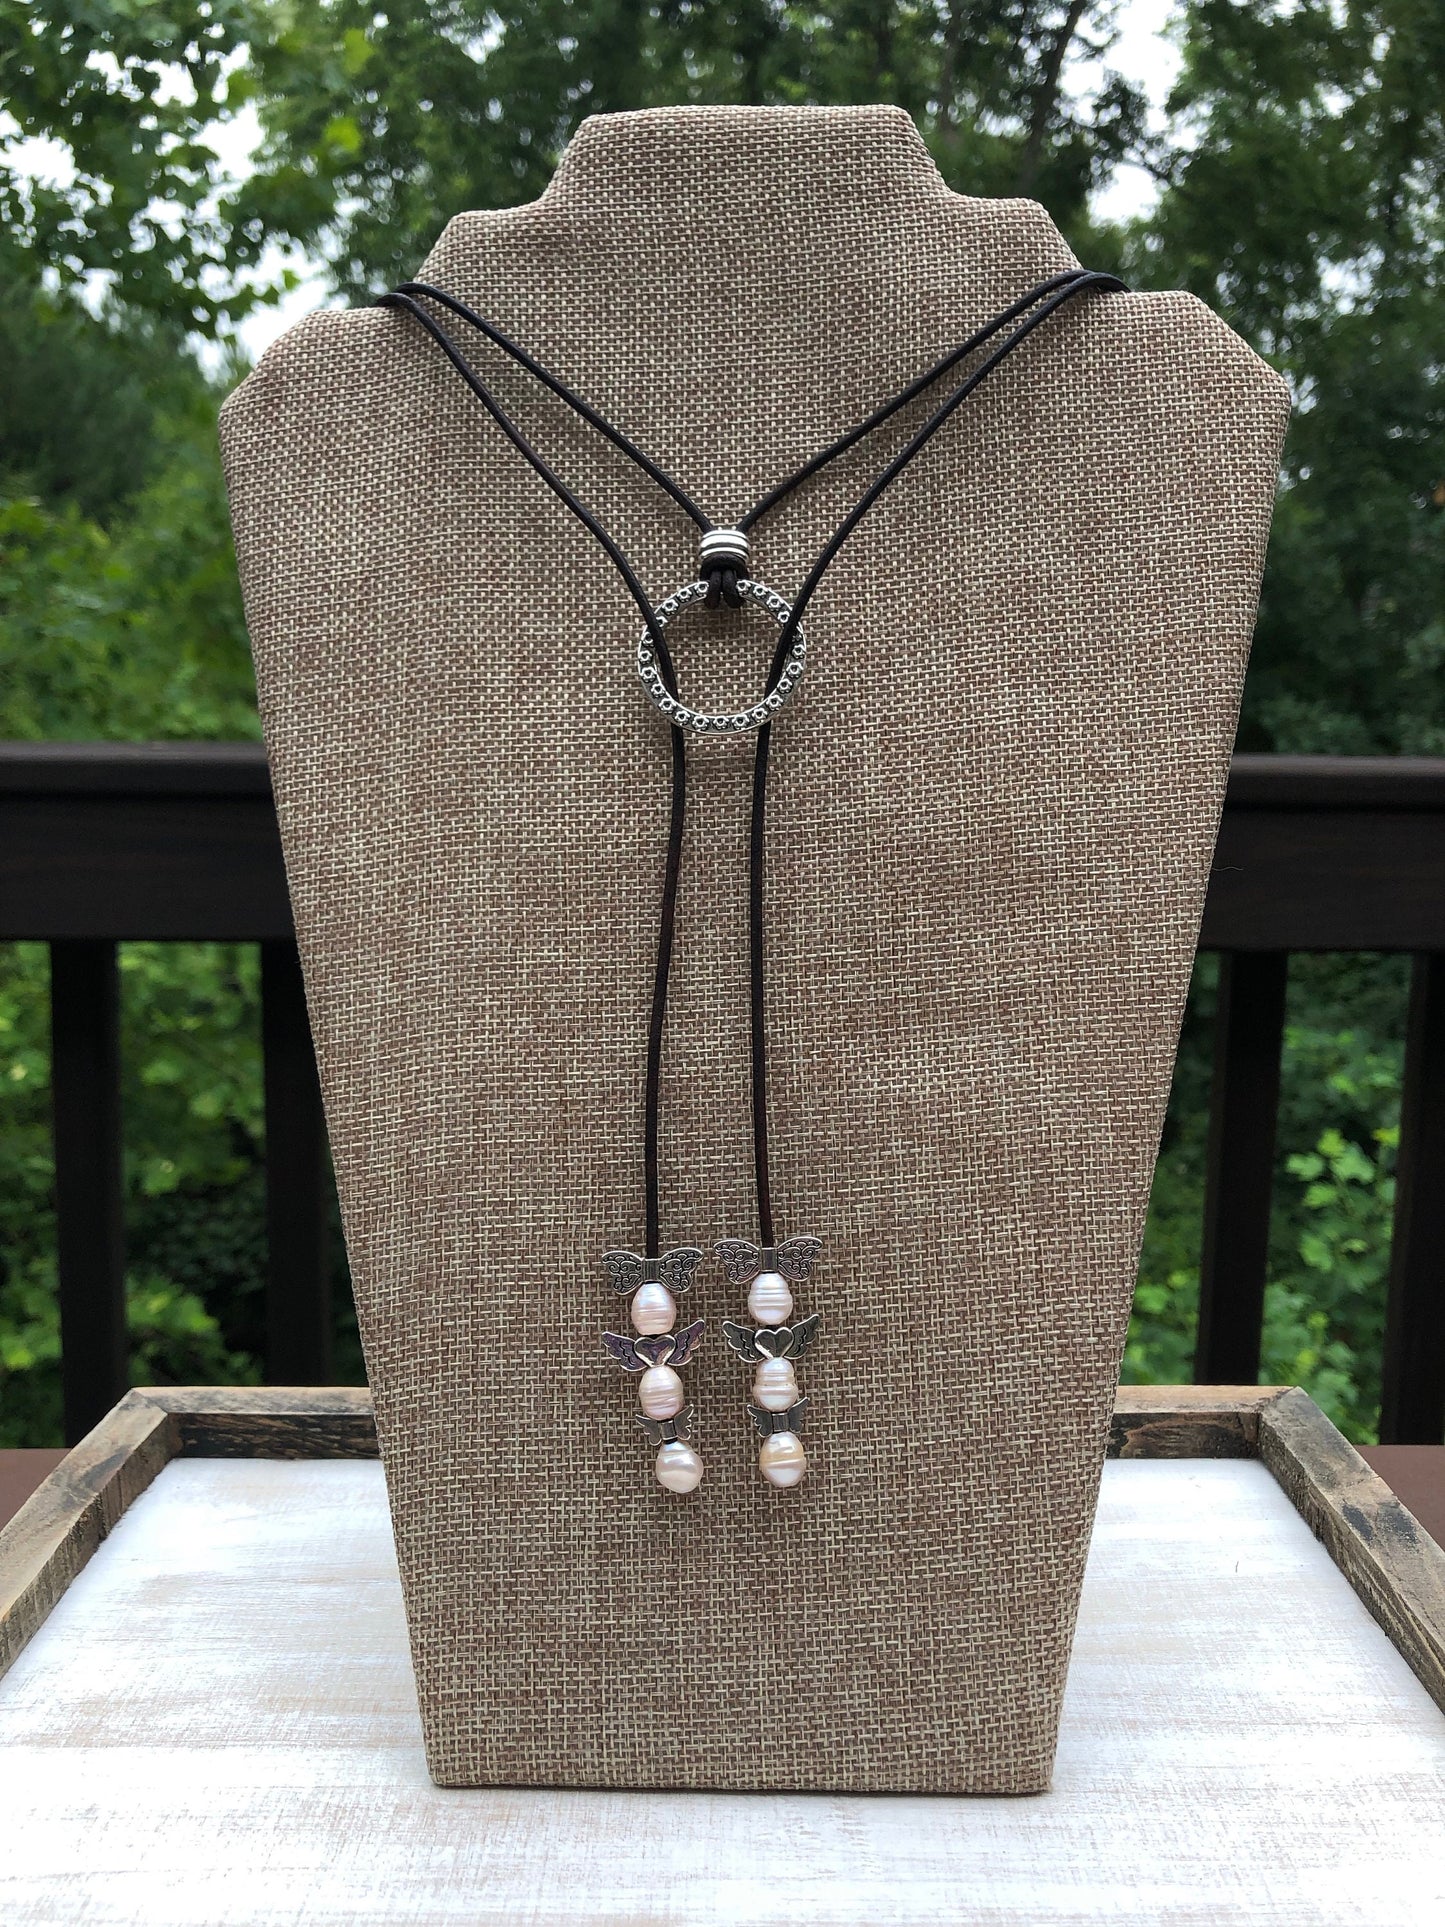 Leather and Pearl Choker Y necklace with freshwater pearls & leather cord.